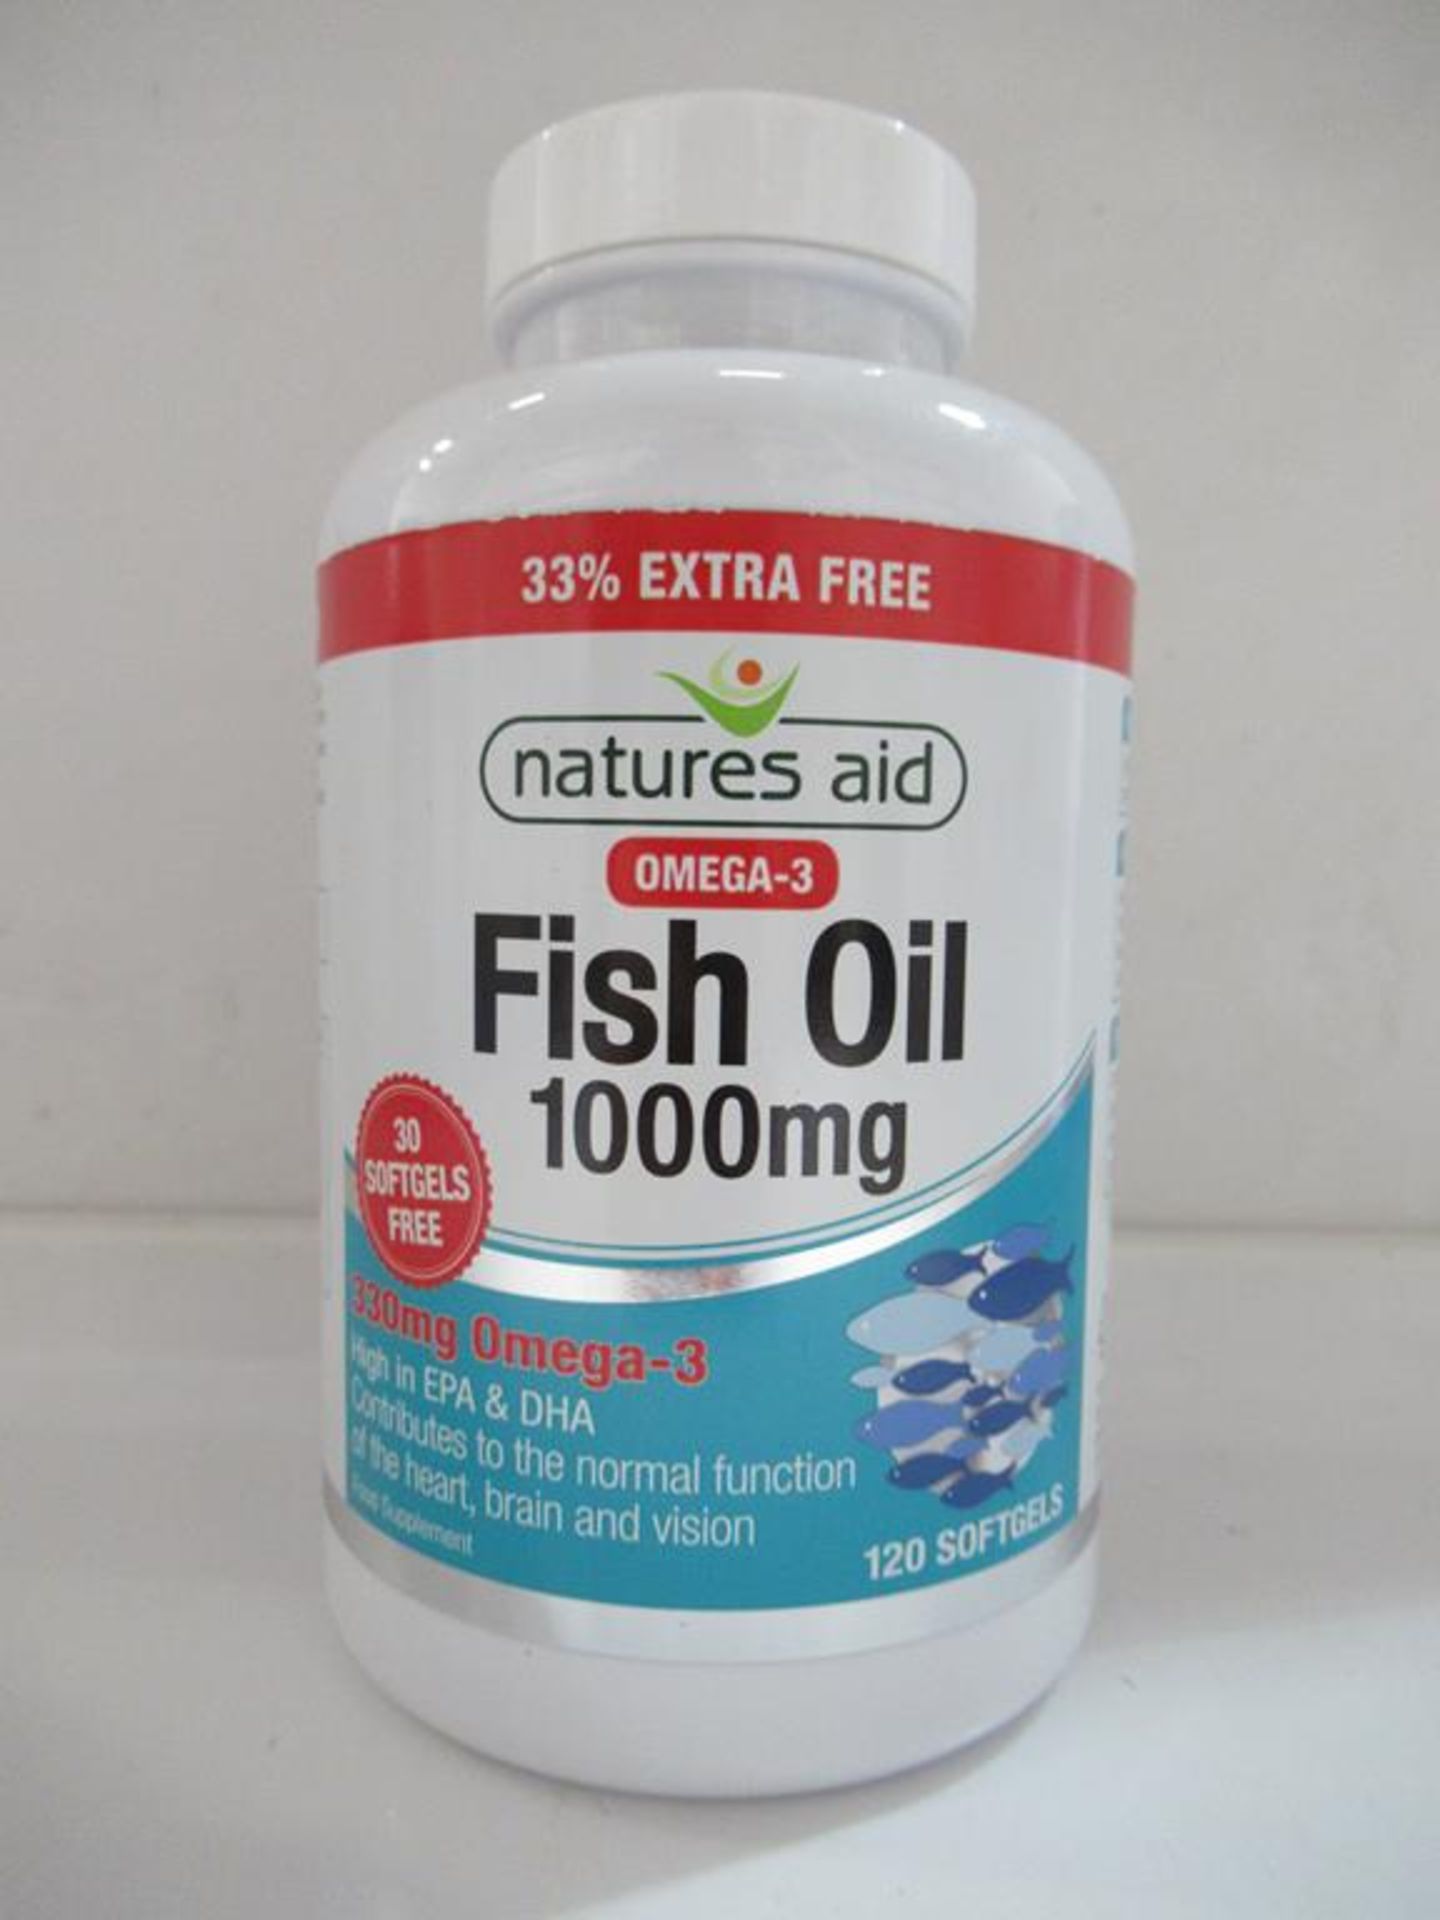 12 Natures Aid supplements to include Fish Oil, Quercetin Formula, Red Clover, Concentrated Garlic, - Image 3 of 7